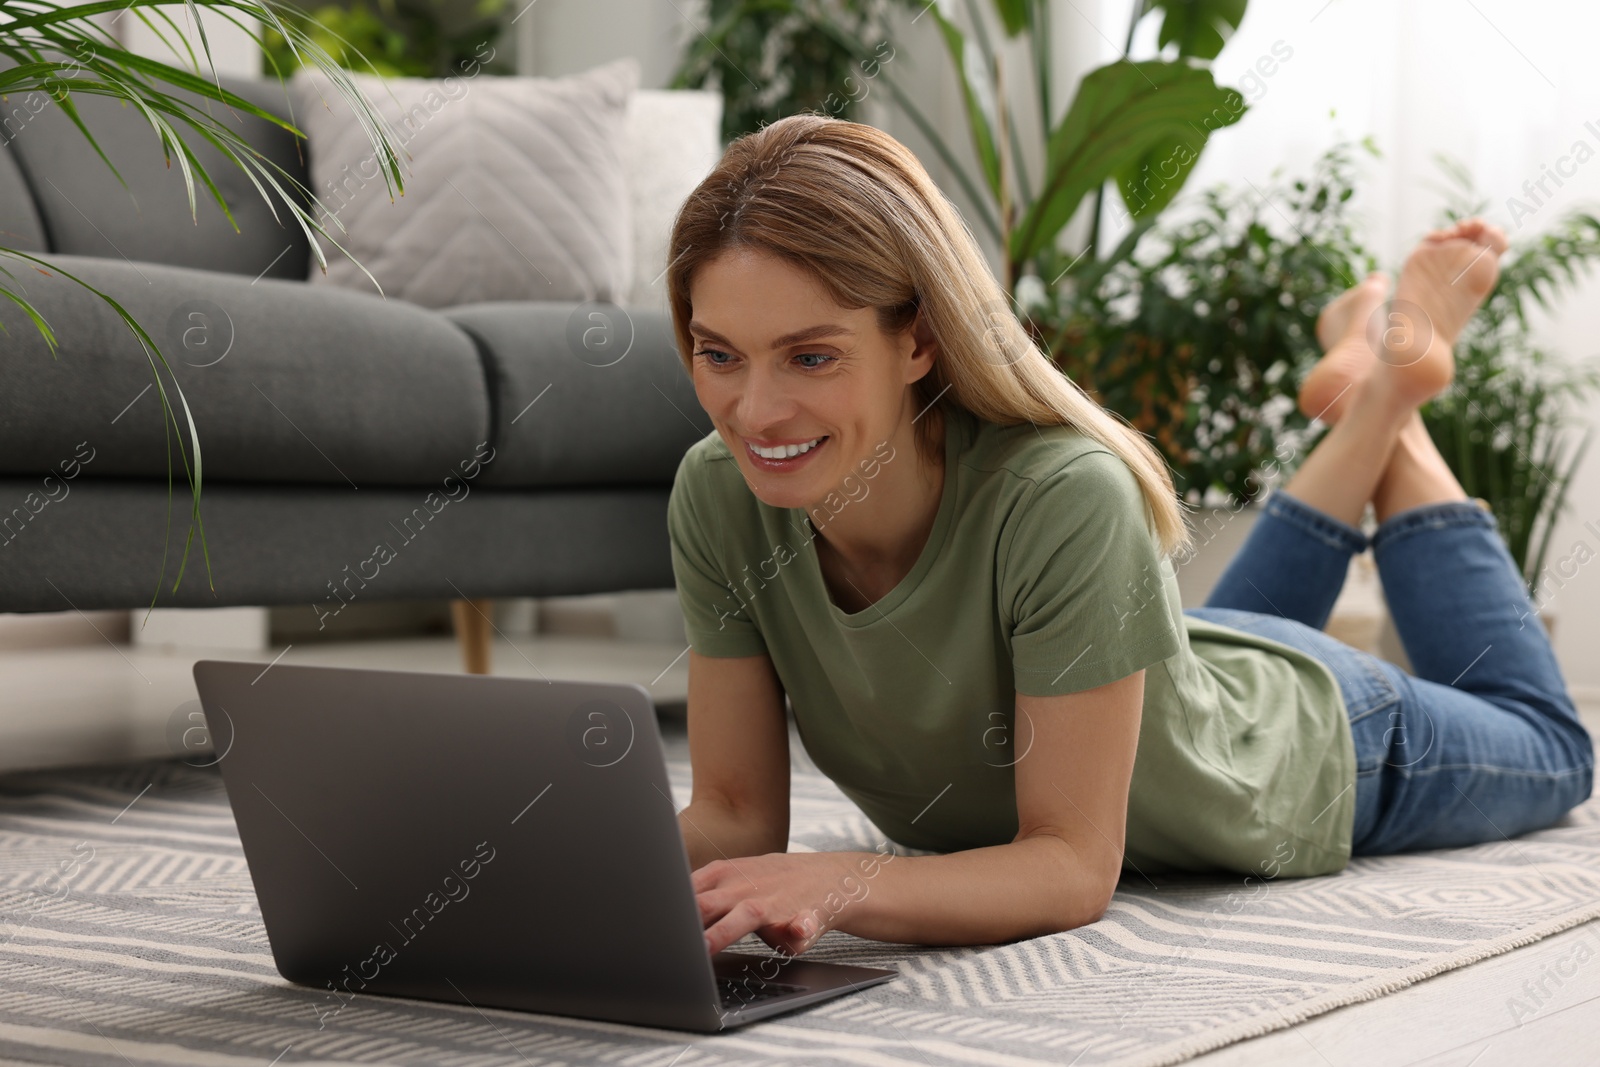 Photo of Woman using laptop on floor in room with beautiful potted houseplants